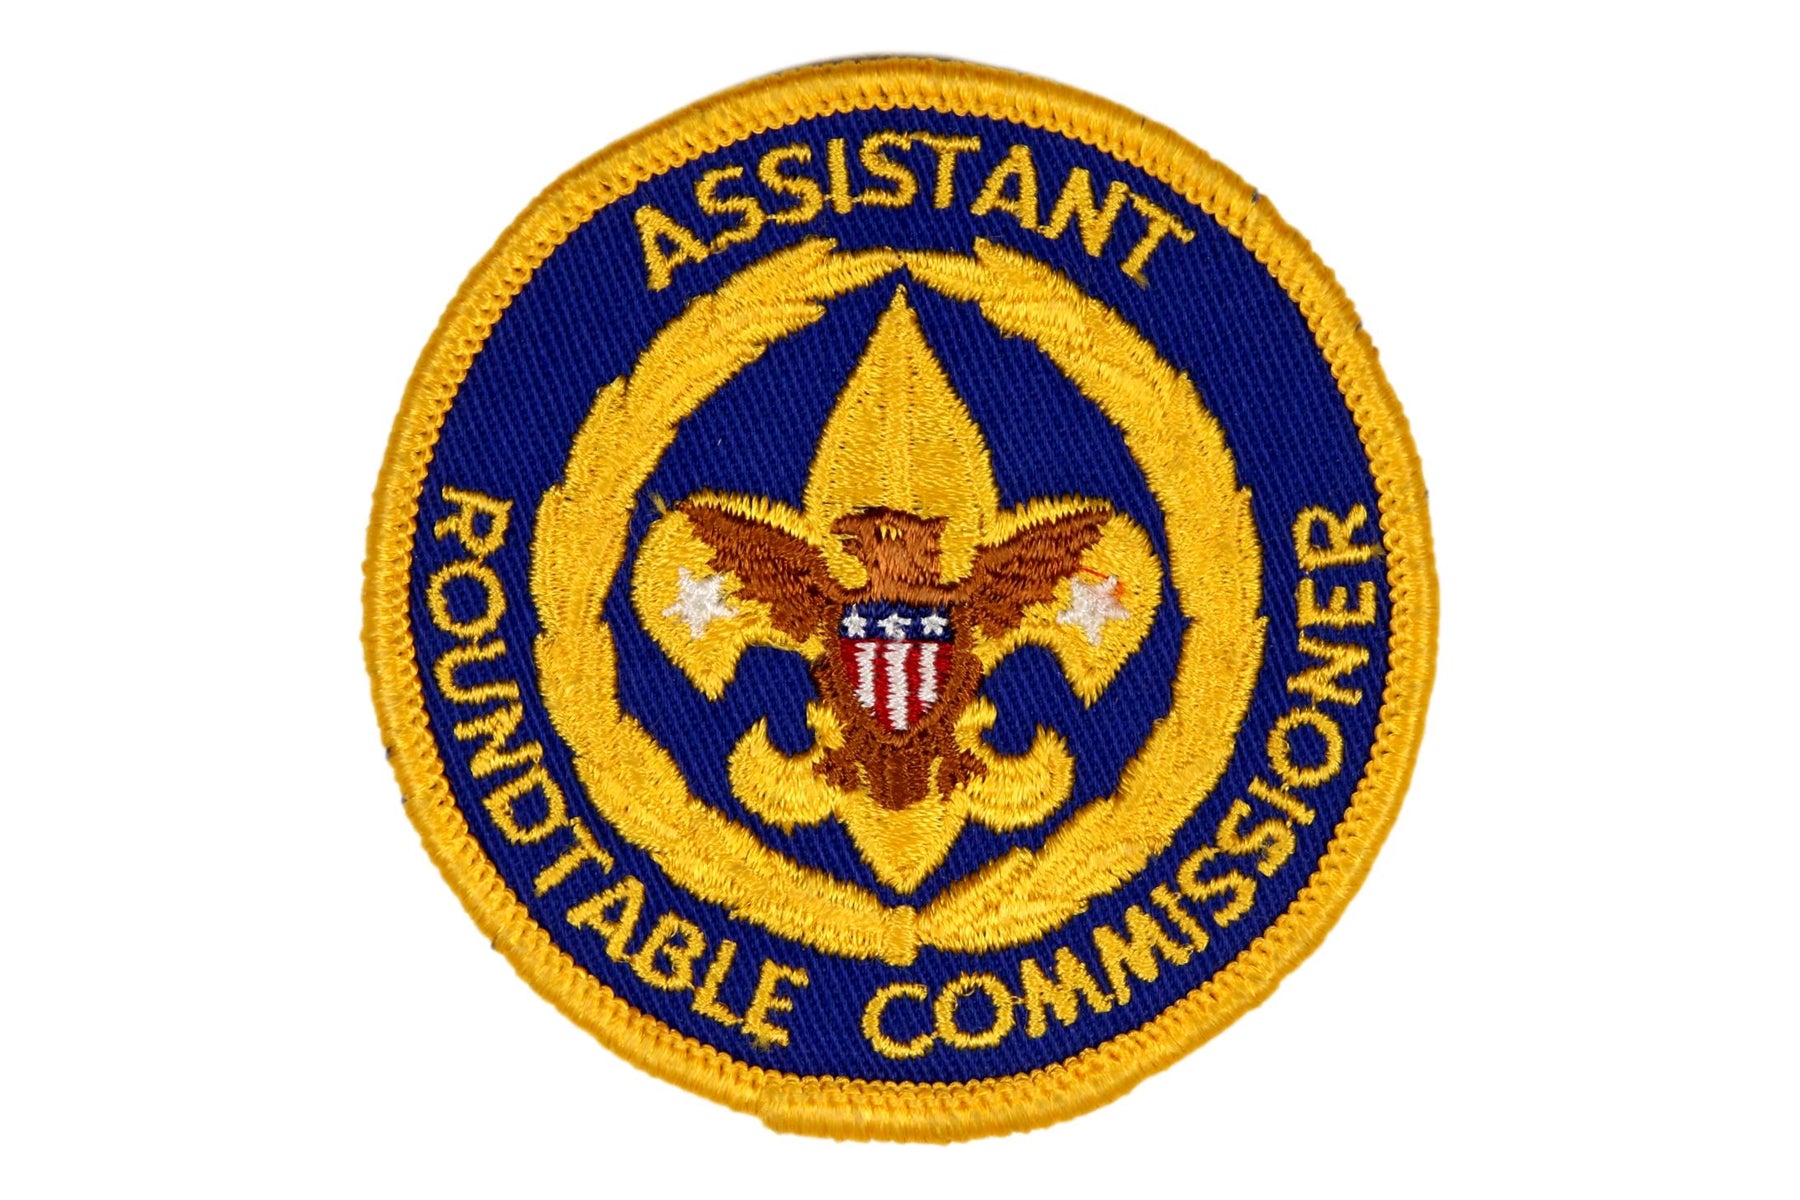 Assistant Roundtable Commissioner Patch 1970